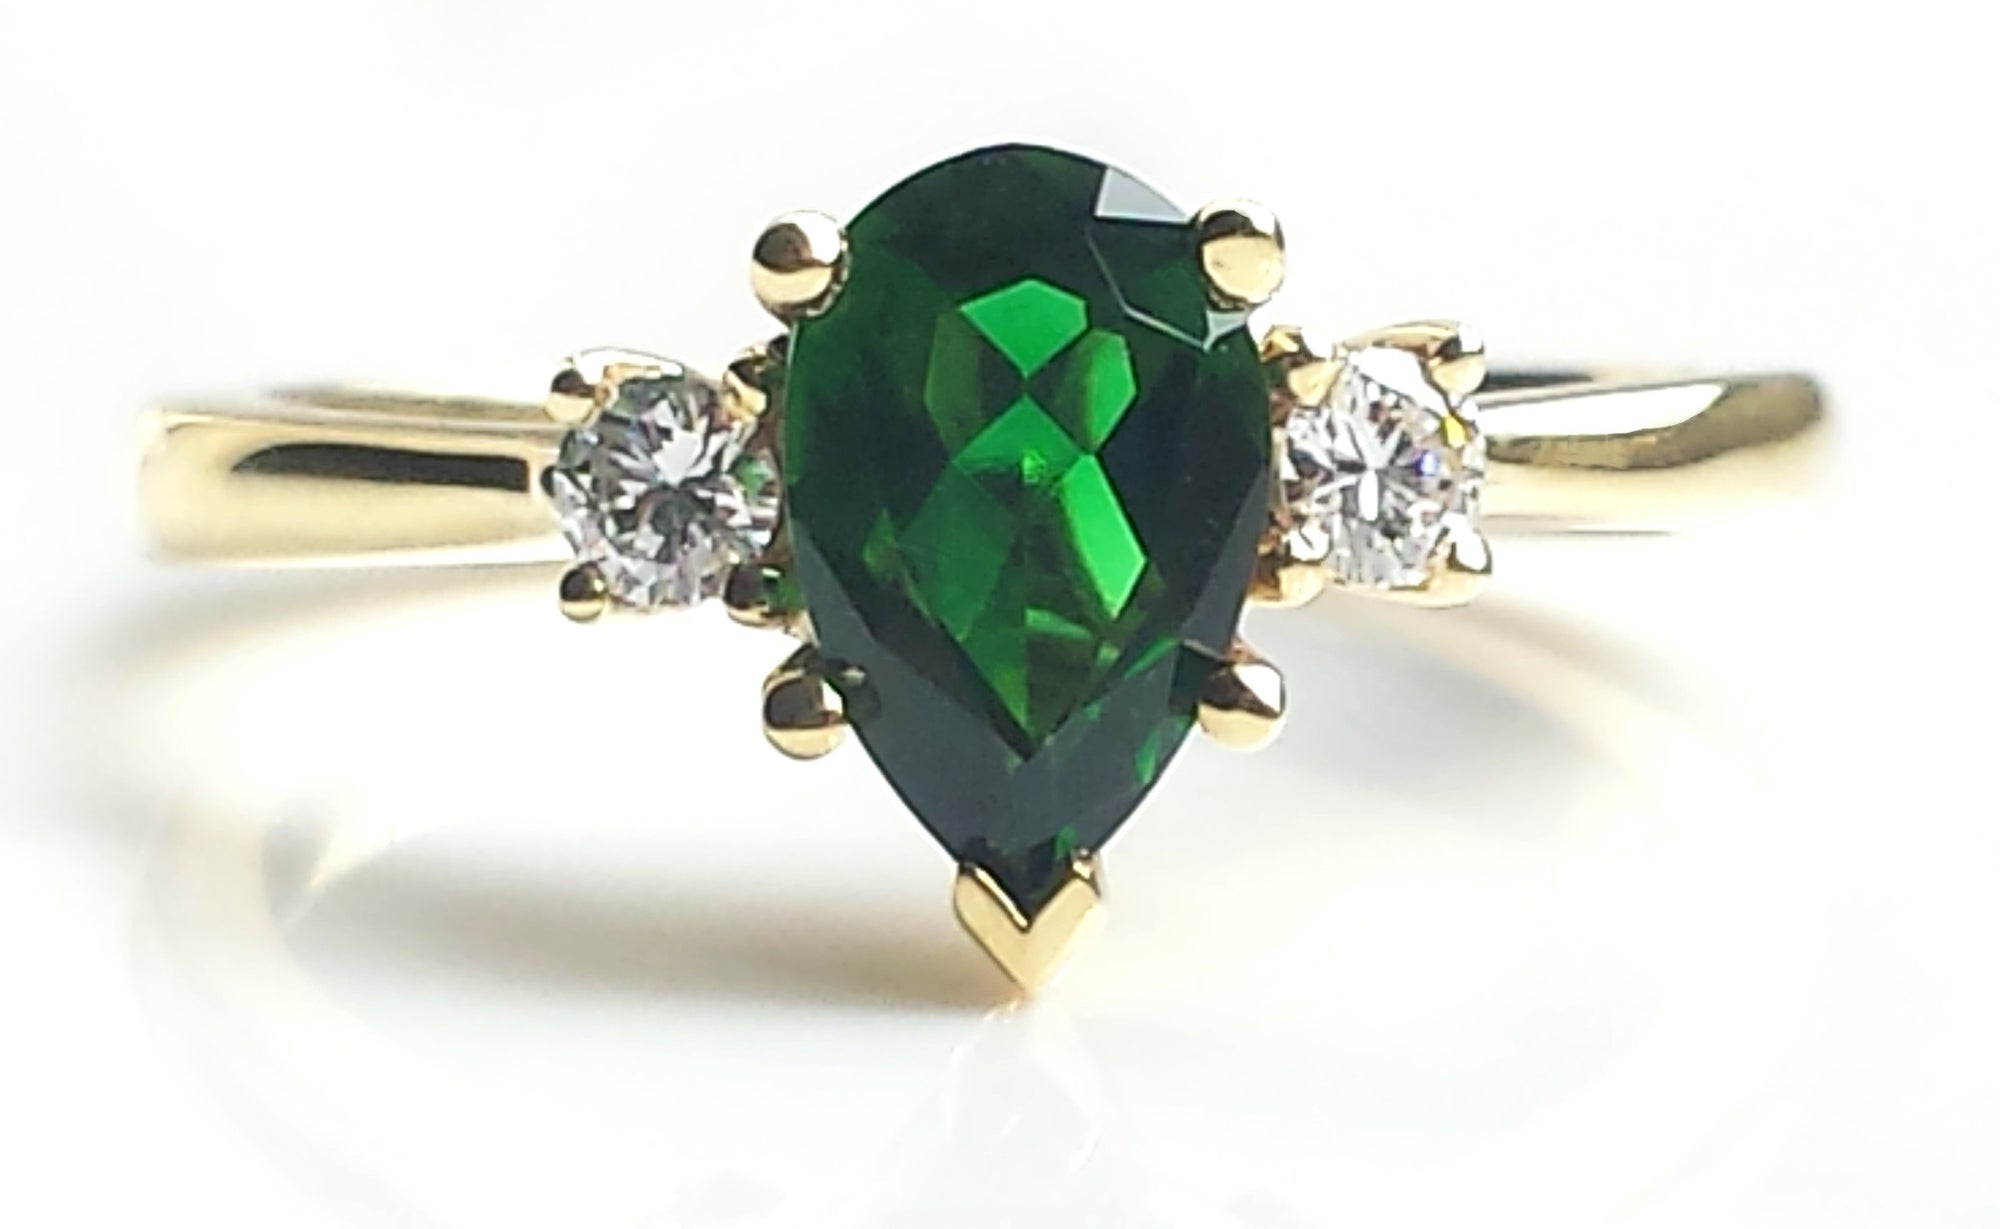 Vintage 1990s Tiffany & Co. 0.70ct Tourmaline & Diamond Ring in 18k Yellow Gold